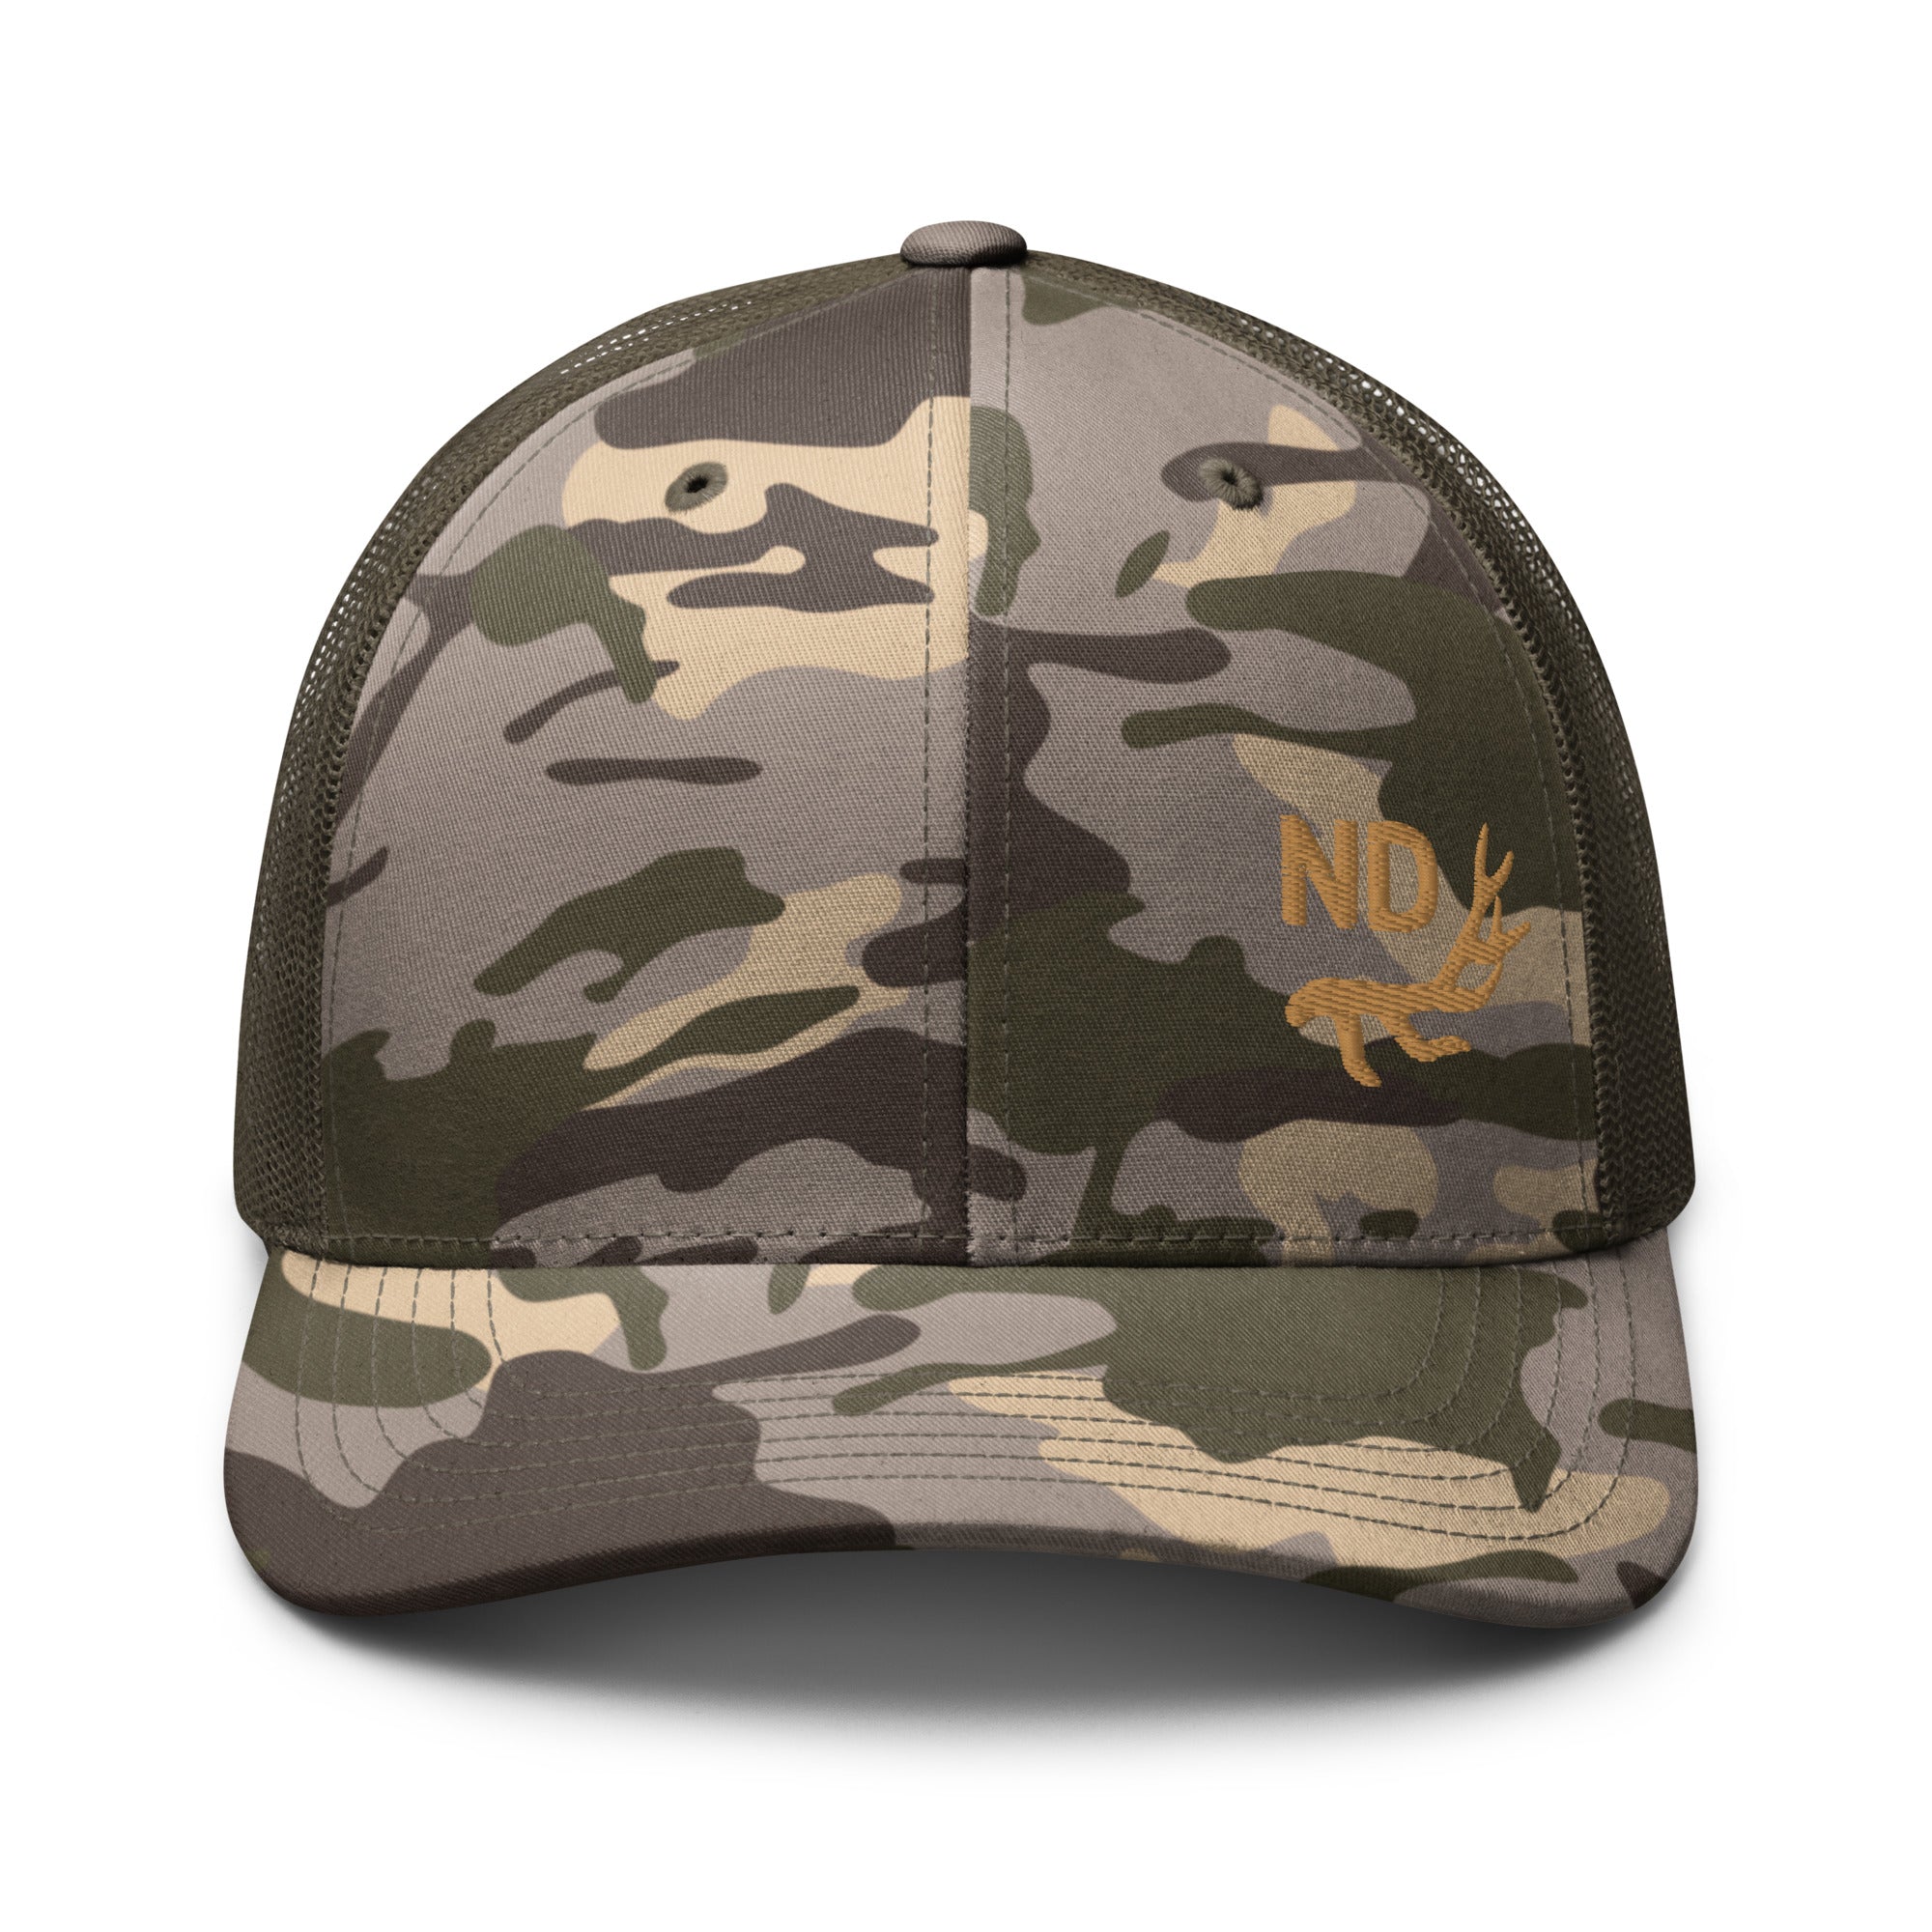 camouflage-trucker-hat-camo-olive-front-655e63499a9f2.jpg